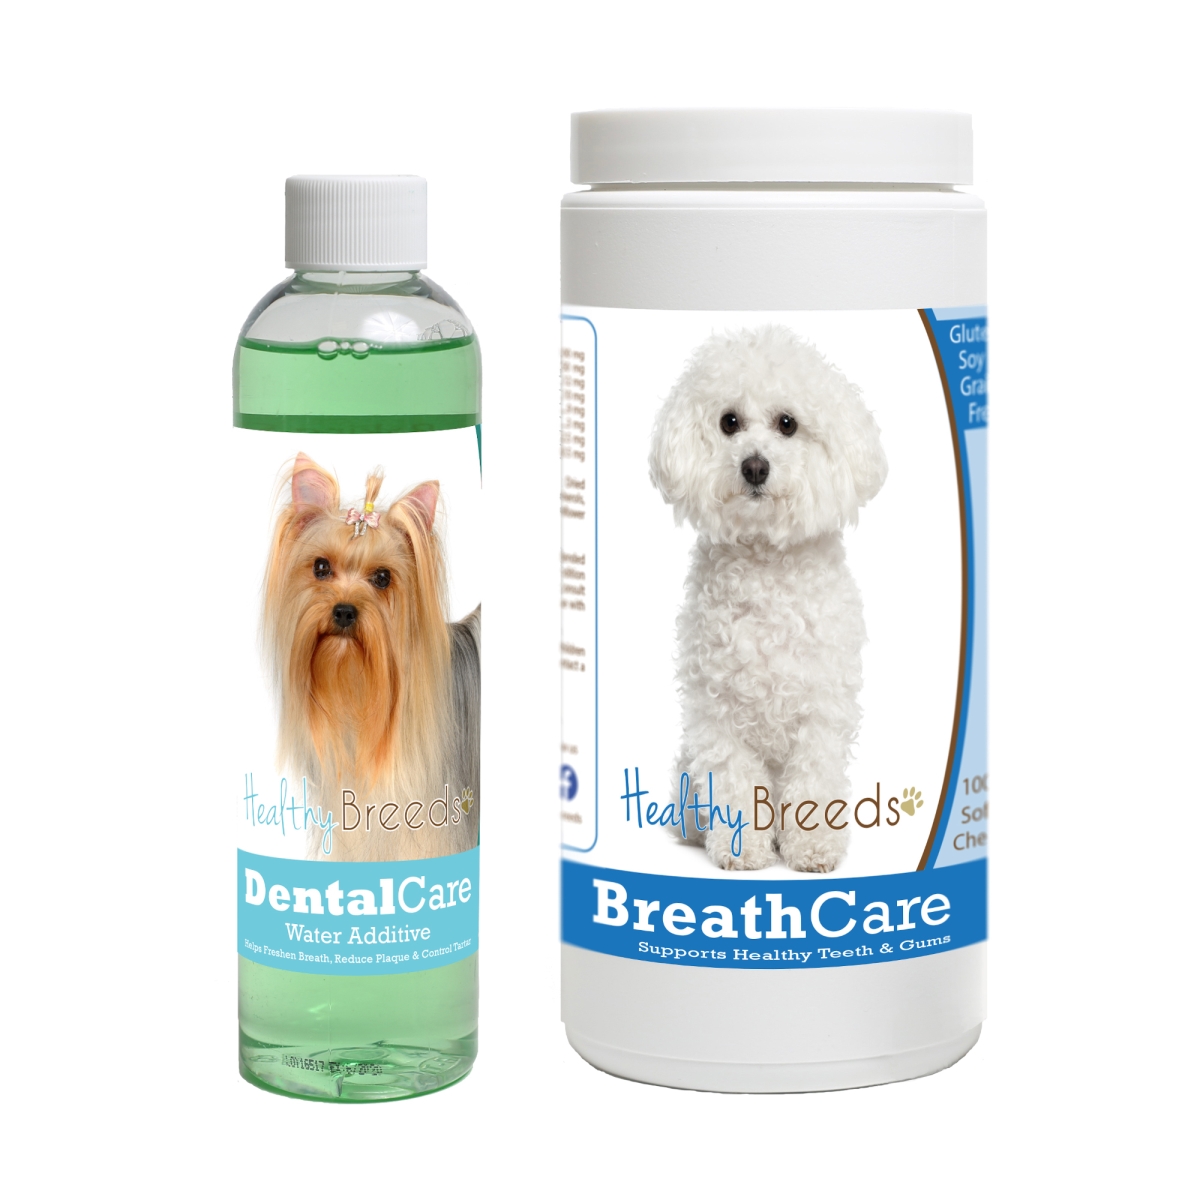 Picture of Healthy Breeds 192959811223 8 oz Snappy Dental Care with Dental Rinse & Breath Care Soft Chews - 60 Count